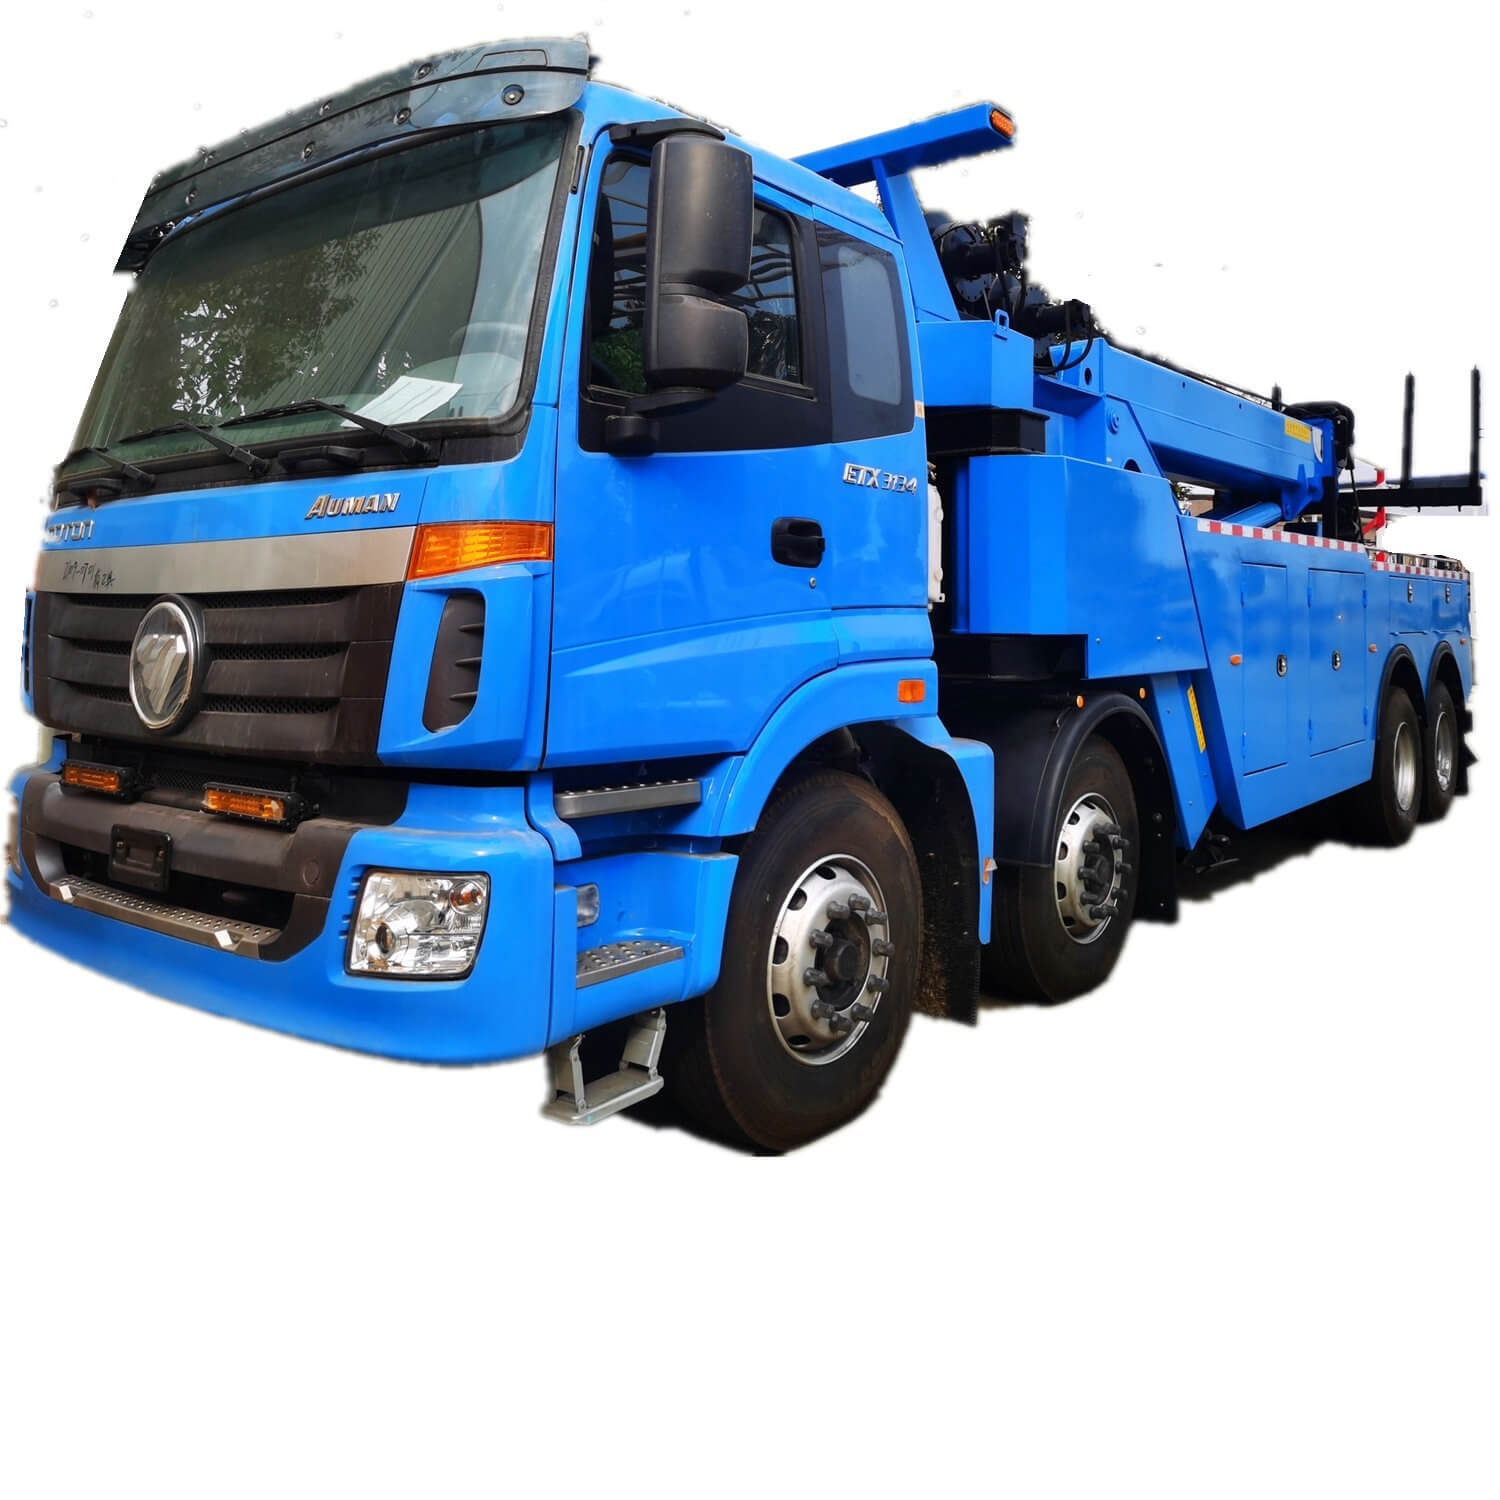 8x4 FOTON 3134 Rotator Recovery Truck Vehicle with Two Hydraulic Winch 250KN Towing 50T 